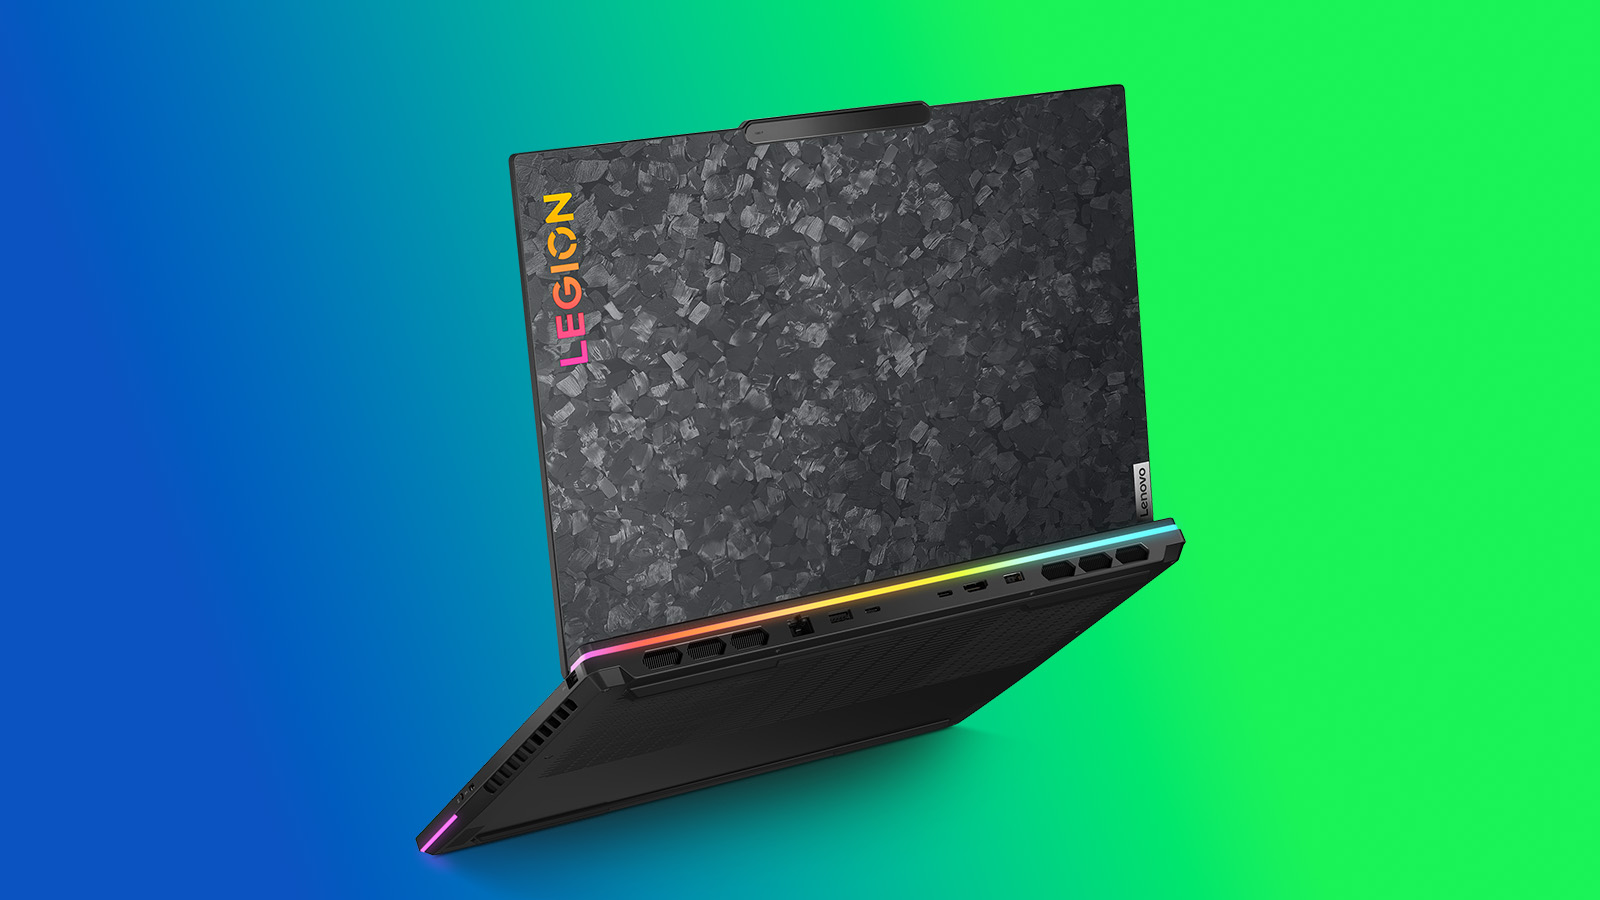 This new Lenovo gaming laptop takes super cool to a new level | T3